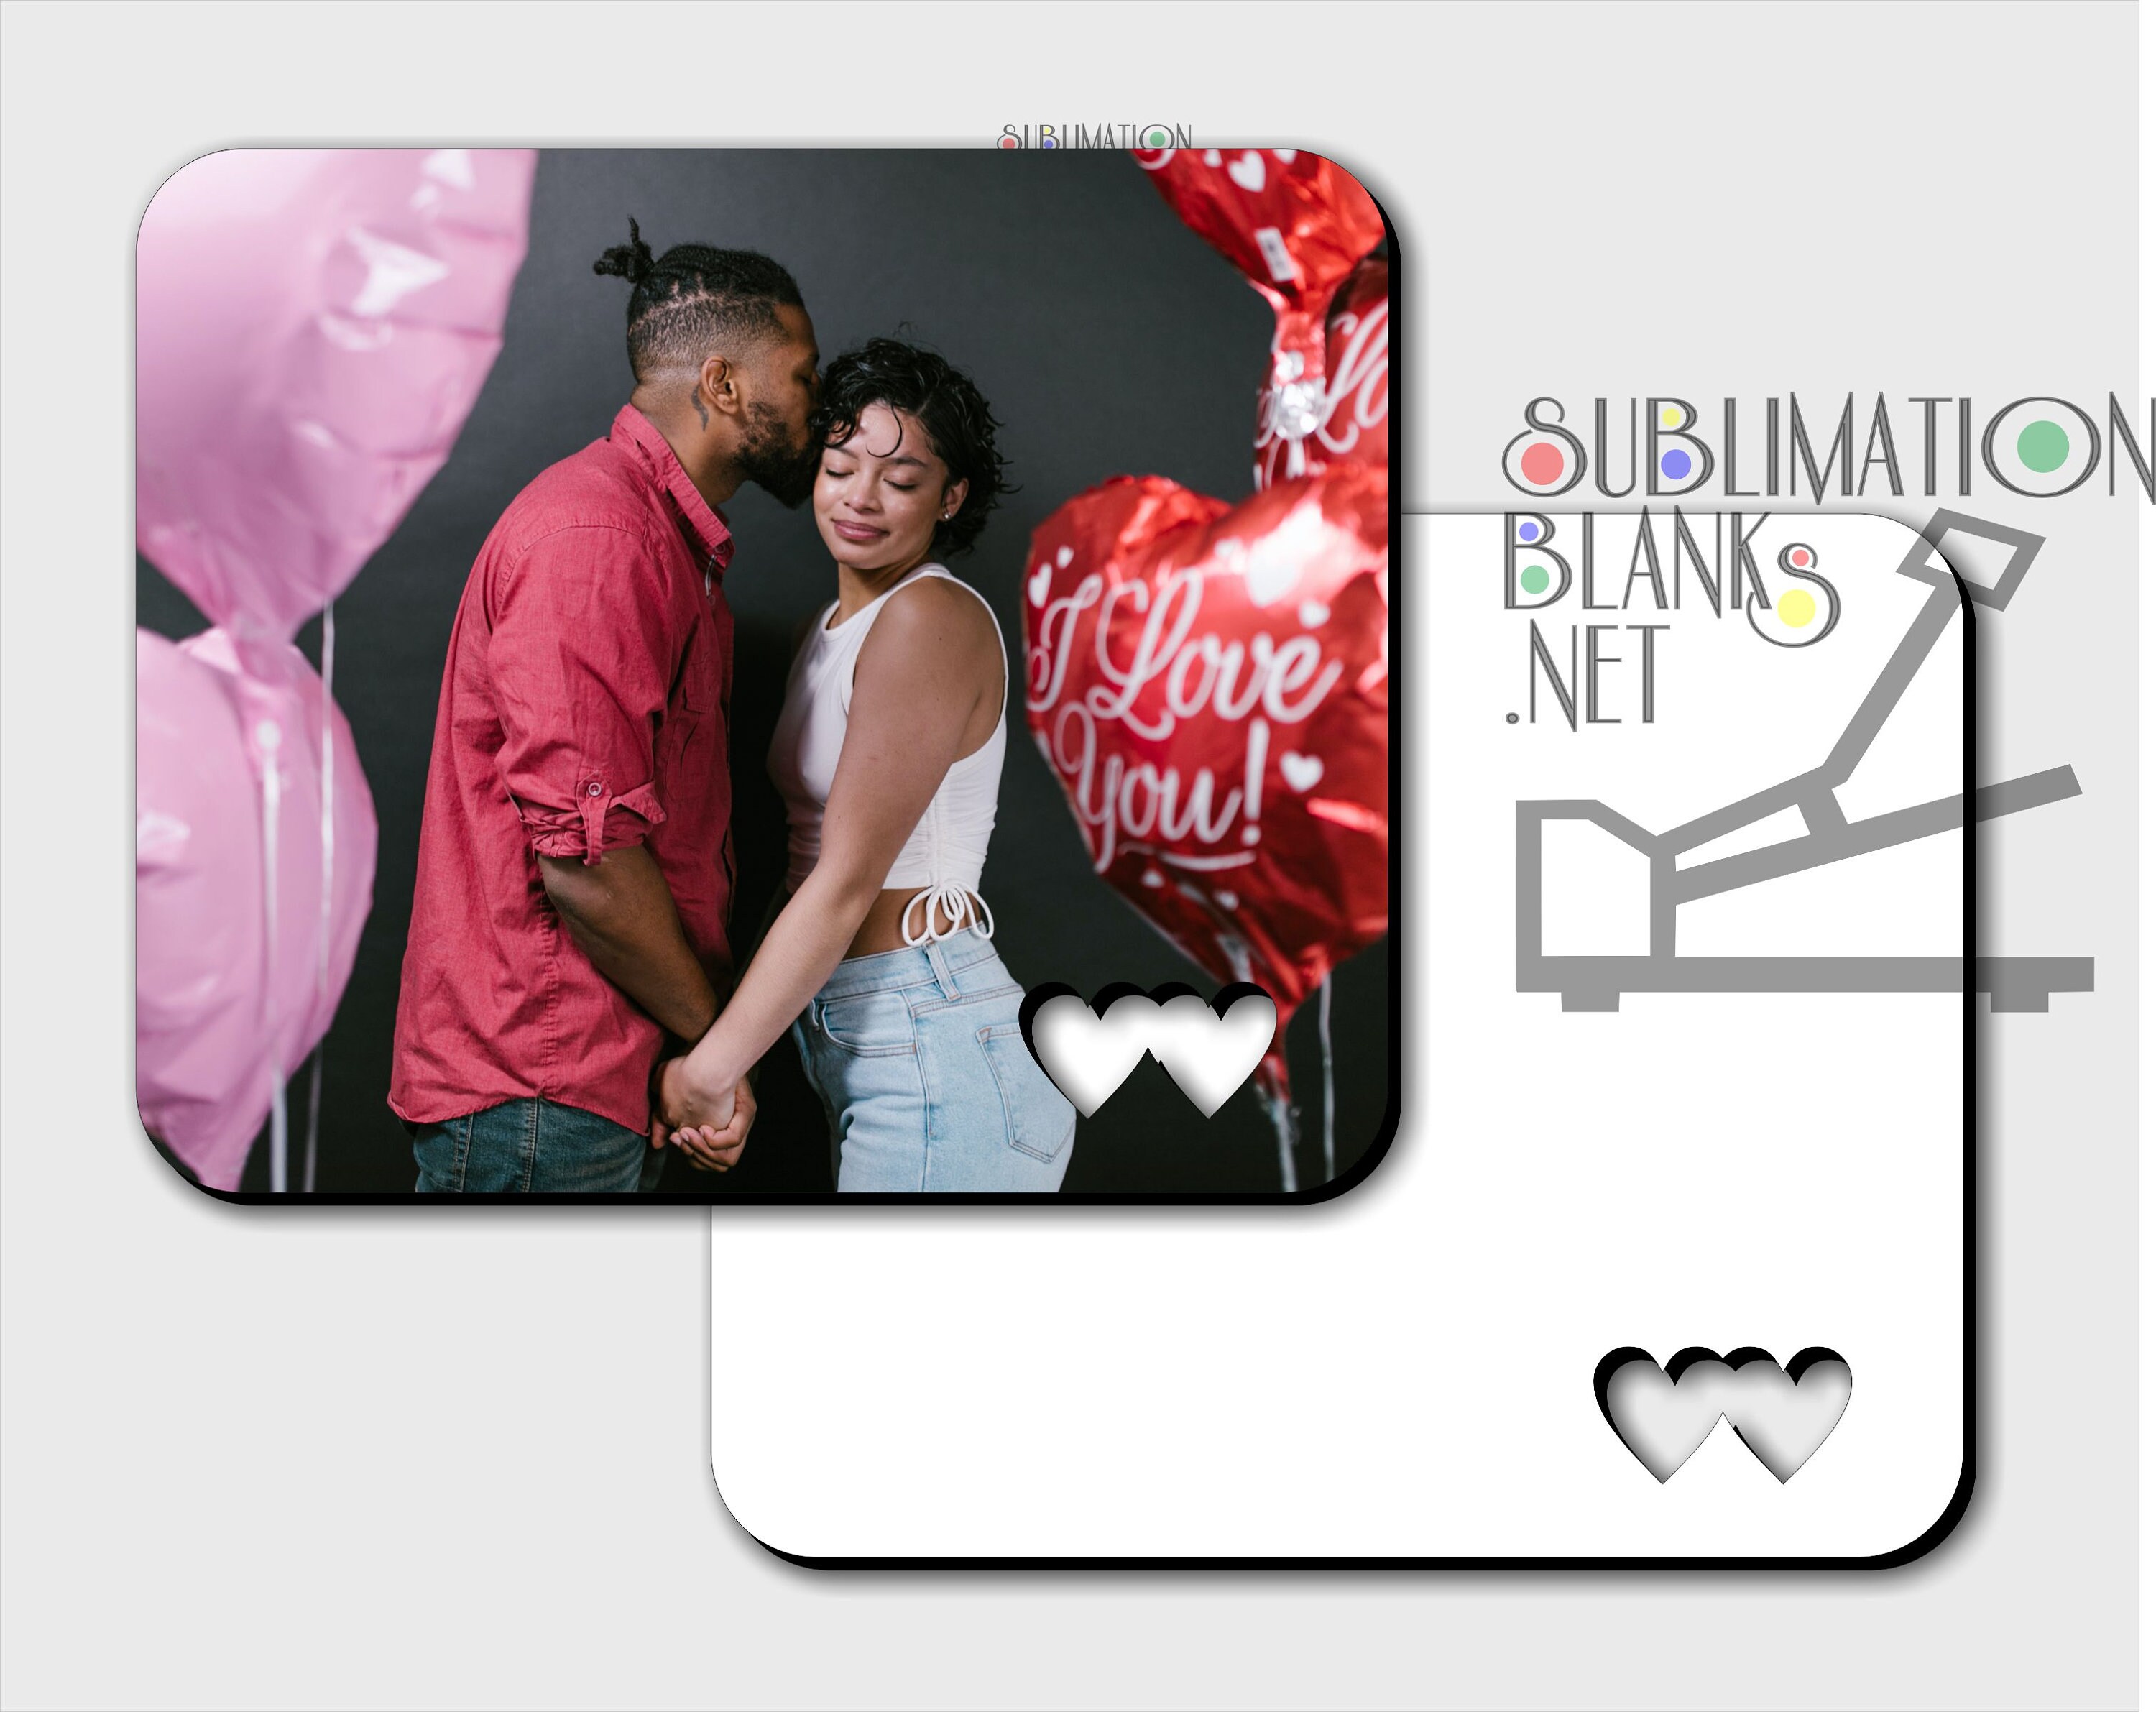 LOVE, PICTURE Frames, Sublimation Blanks, Unisub Blanks for Sublimation,  Photo Frame, Wholesale Sublimation Blanks, Diy, Valentines Day Gift 